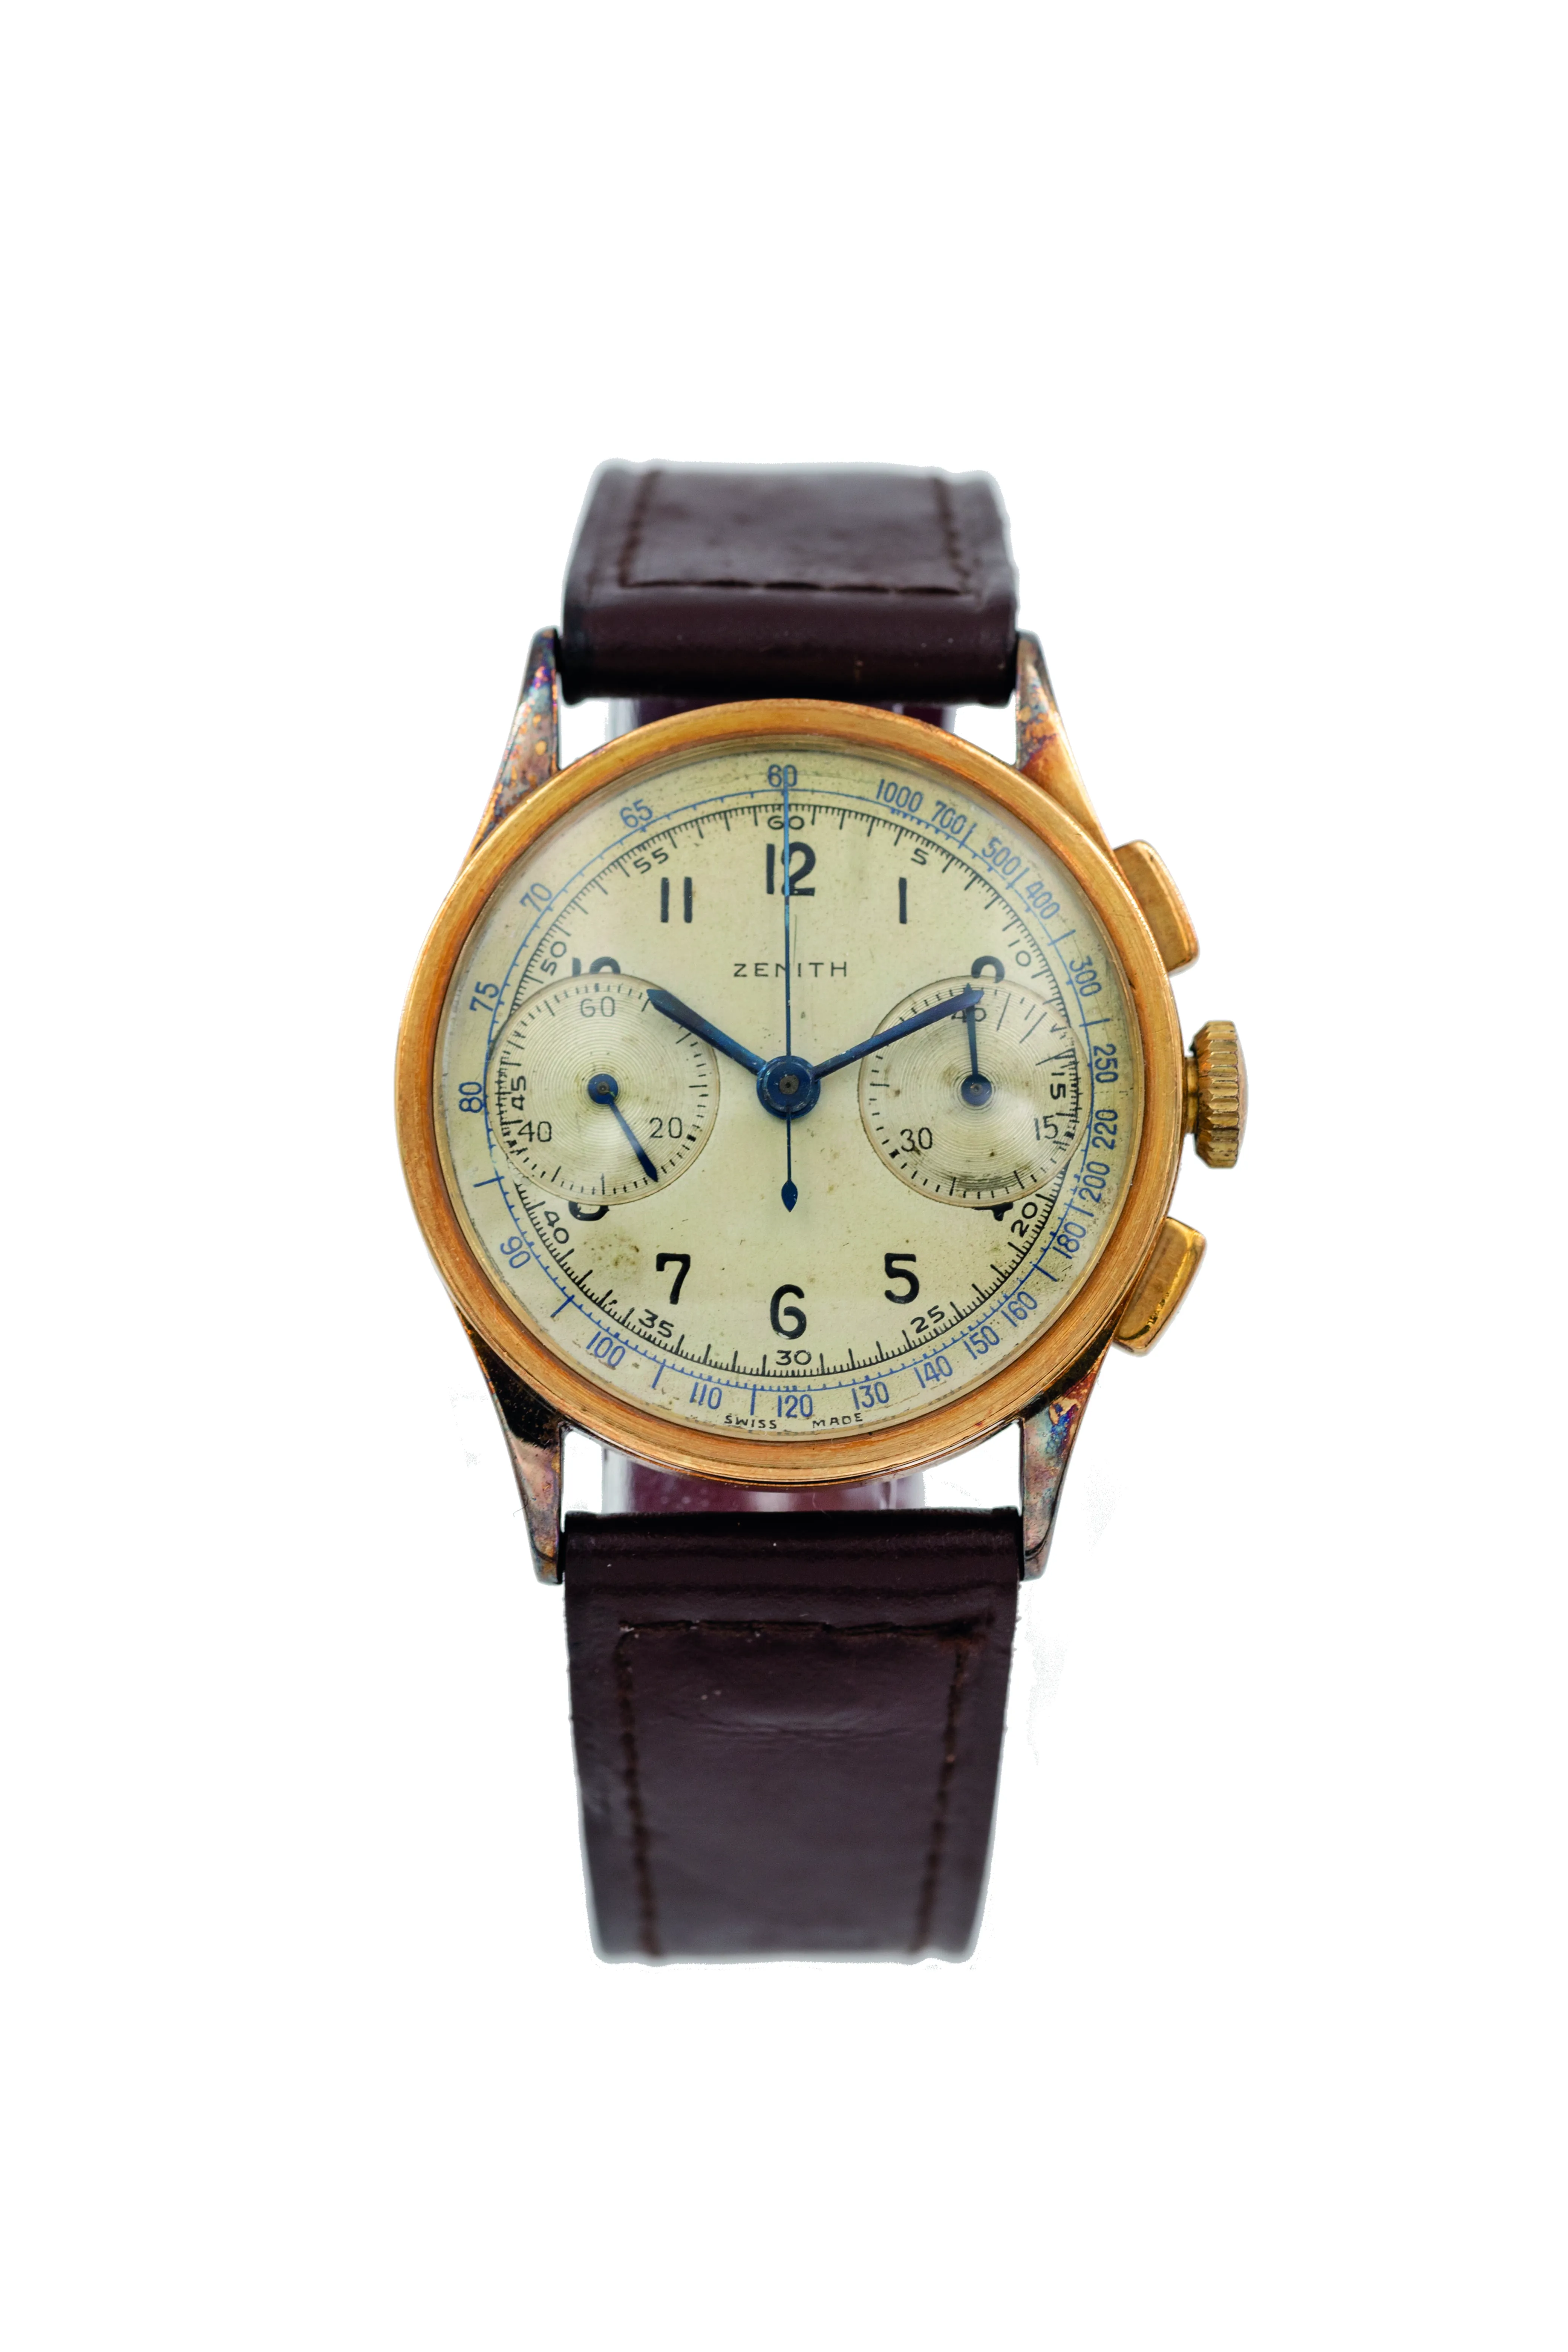 Zenith Chronograph 5632 35mm Yellow gold Champagne